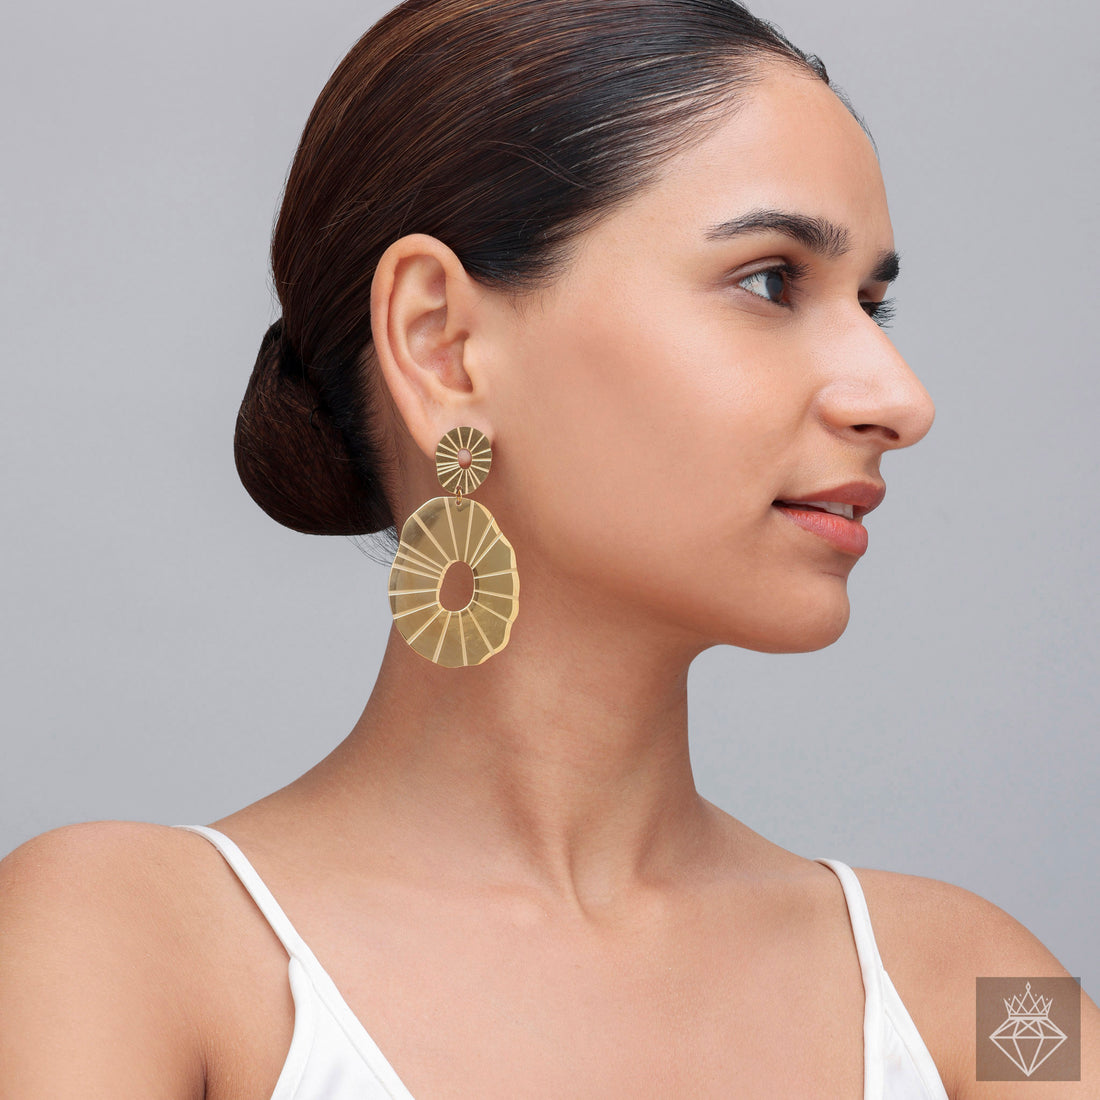 Abstract Artistry Earrings By PRAO